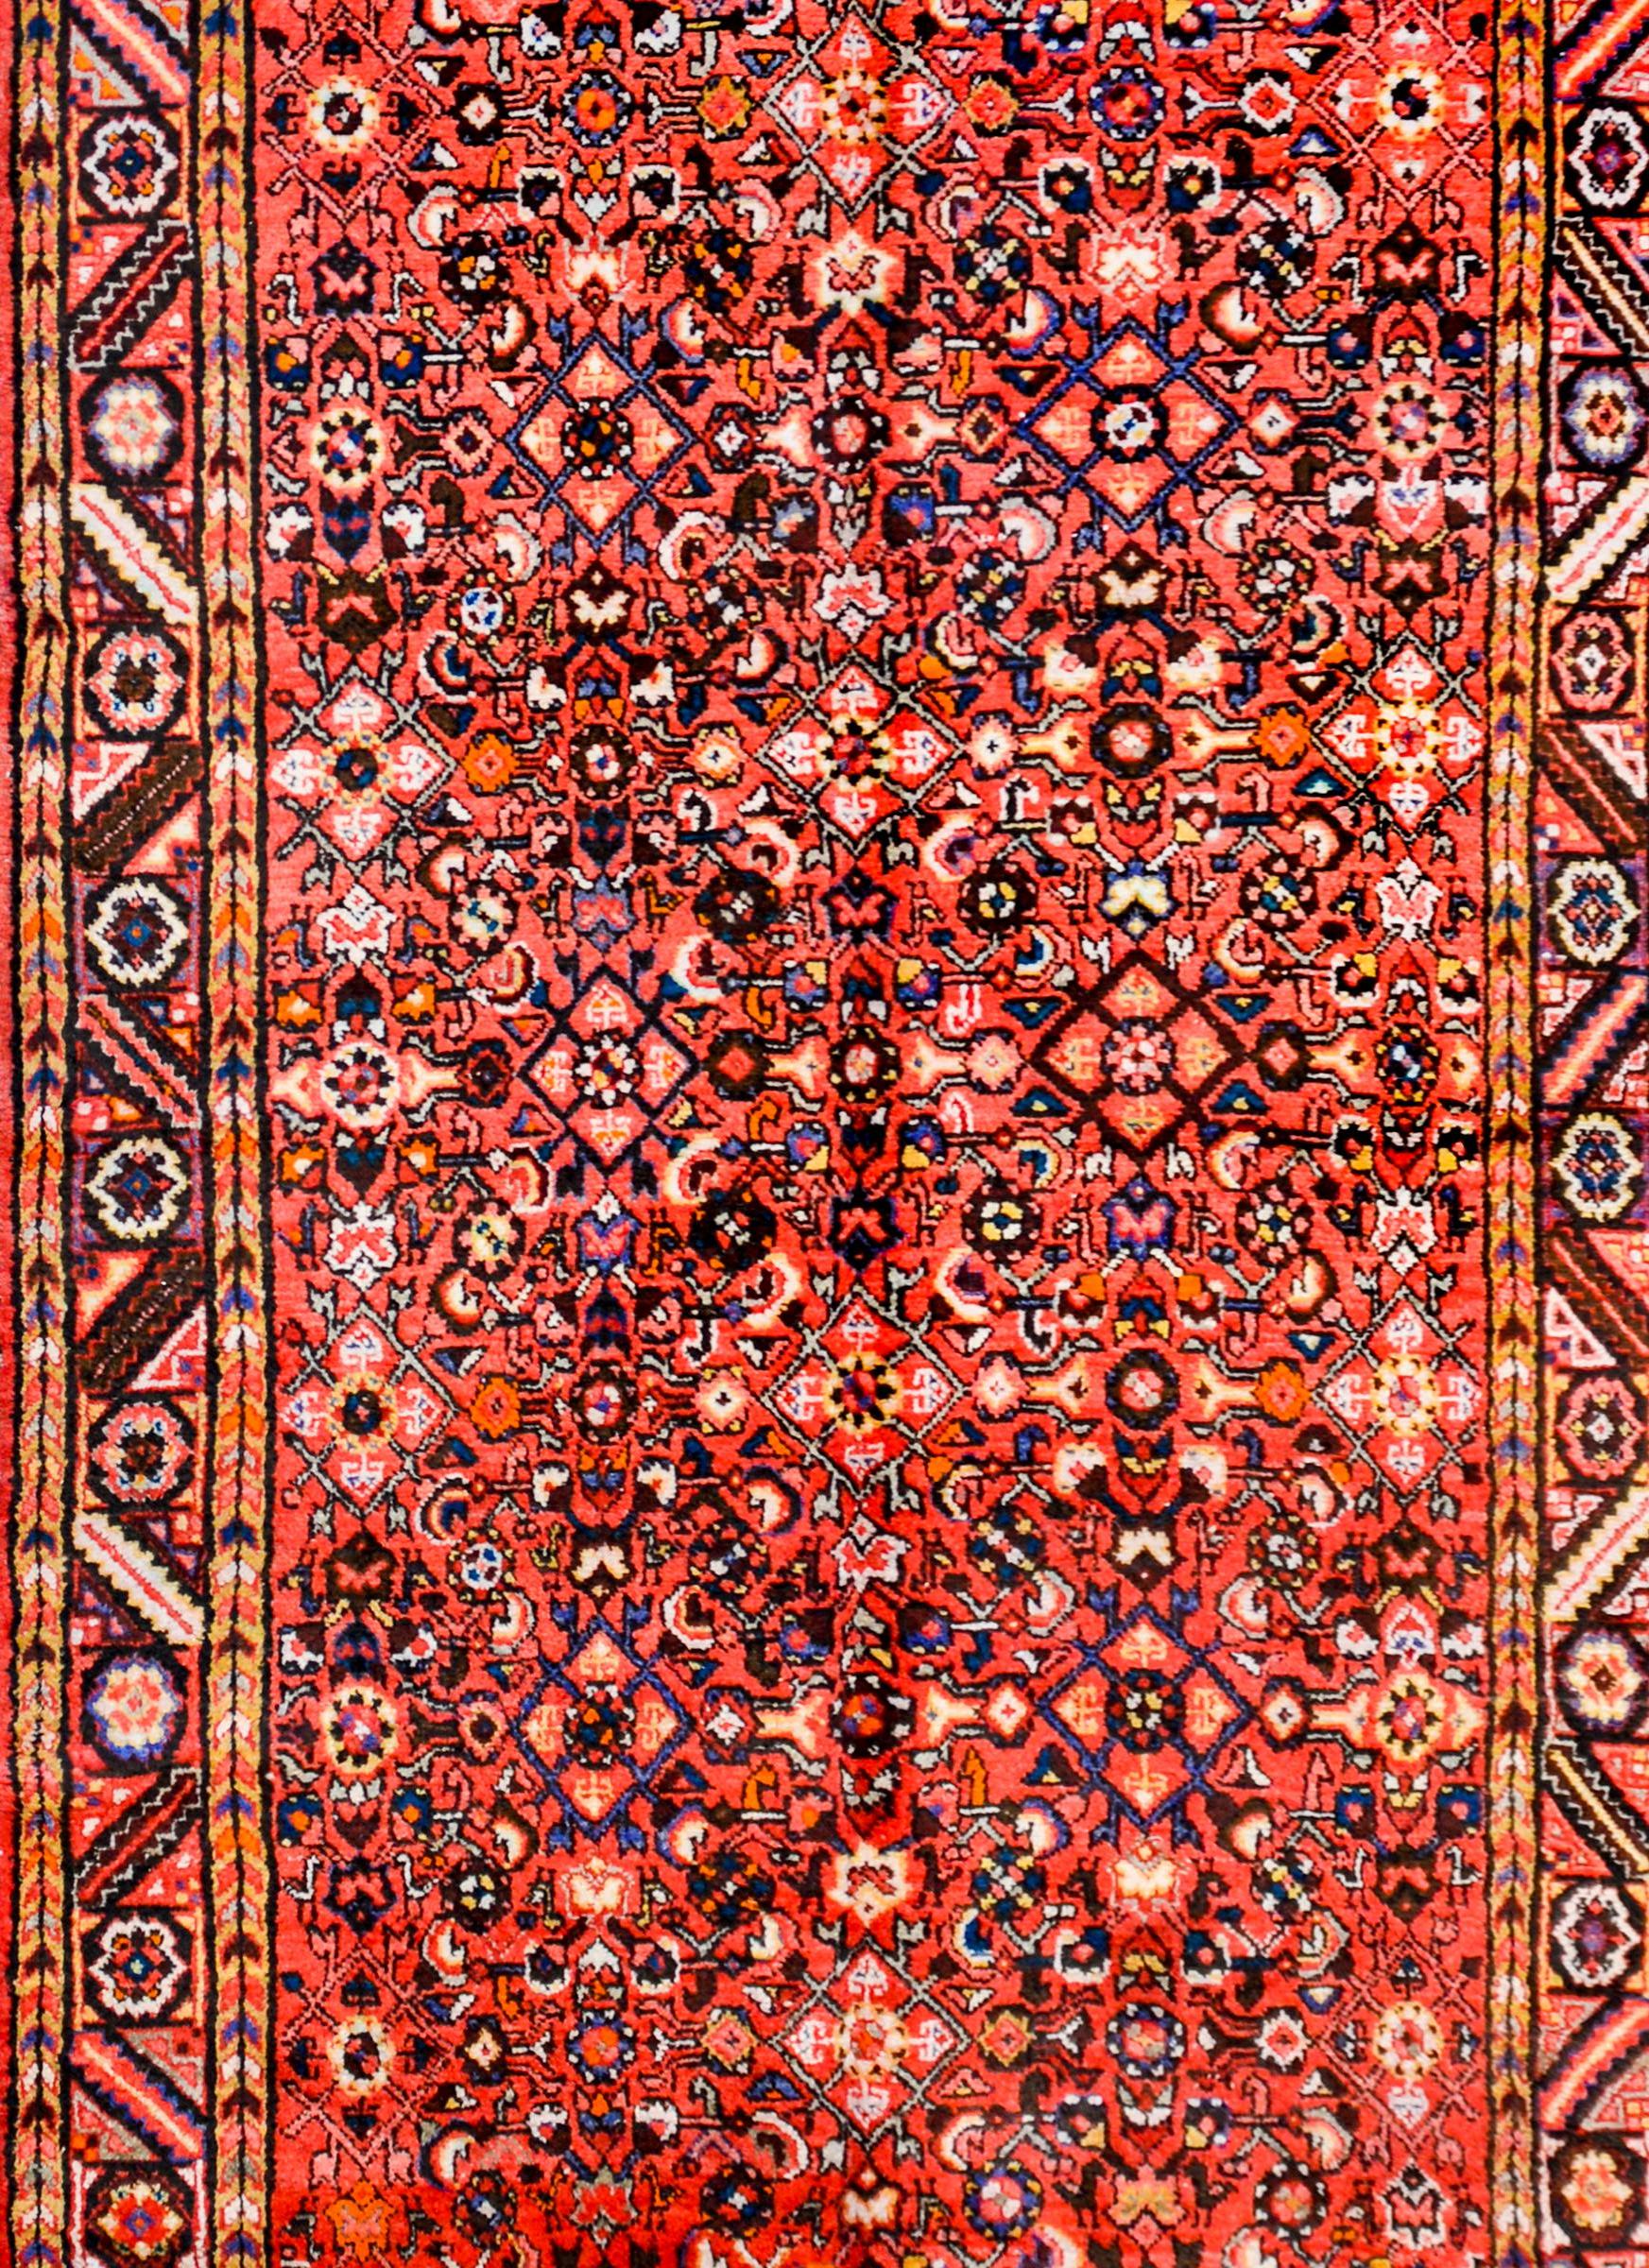 Wonderful vintage mid-20th century Persian Hamadan rug with an densely woven field containing a trellised floral pattern woven in orange, black, indigo, and white colored wool, on a bright crimson colored background. The border is beautiful with a